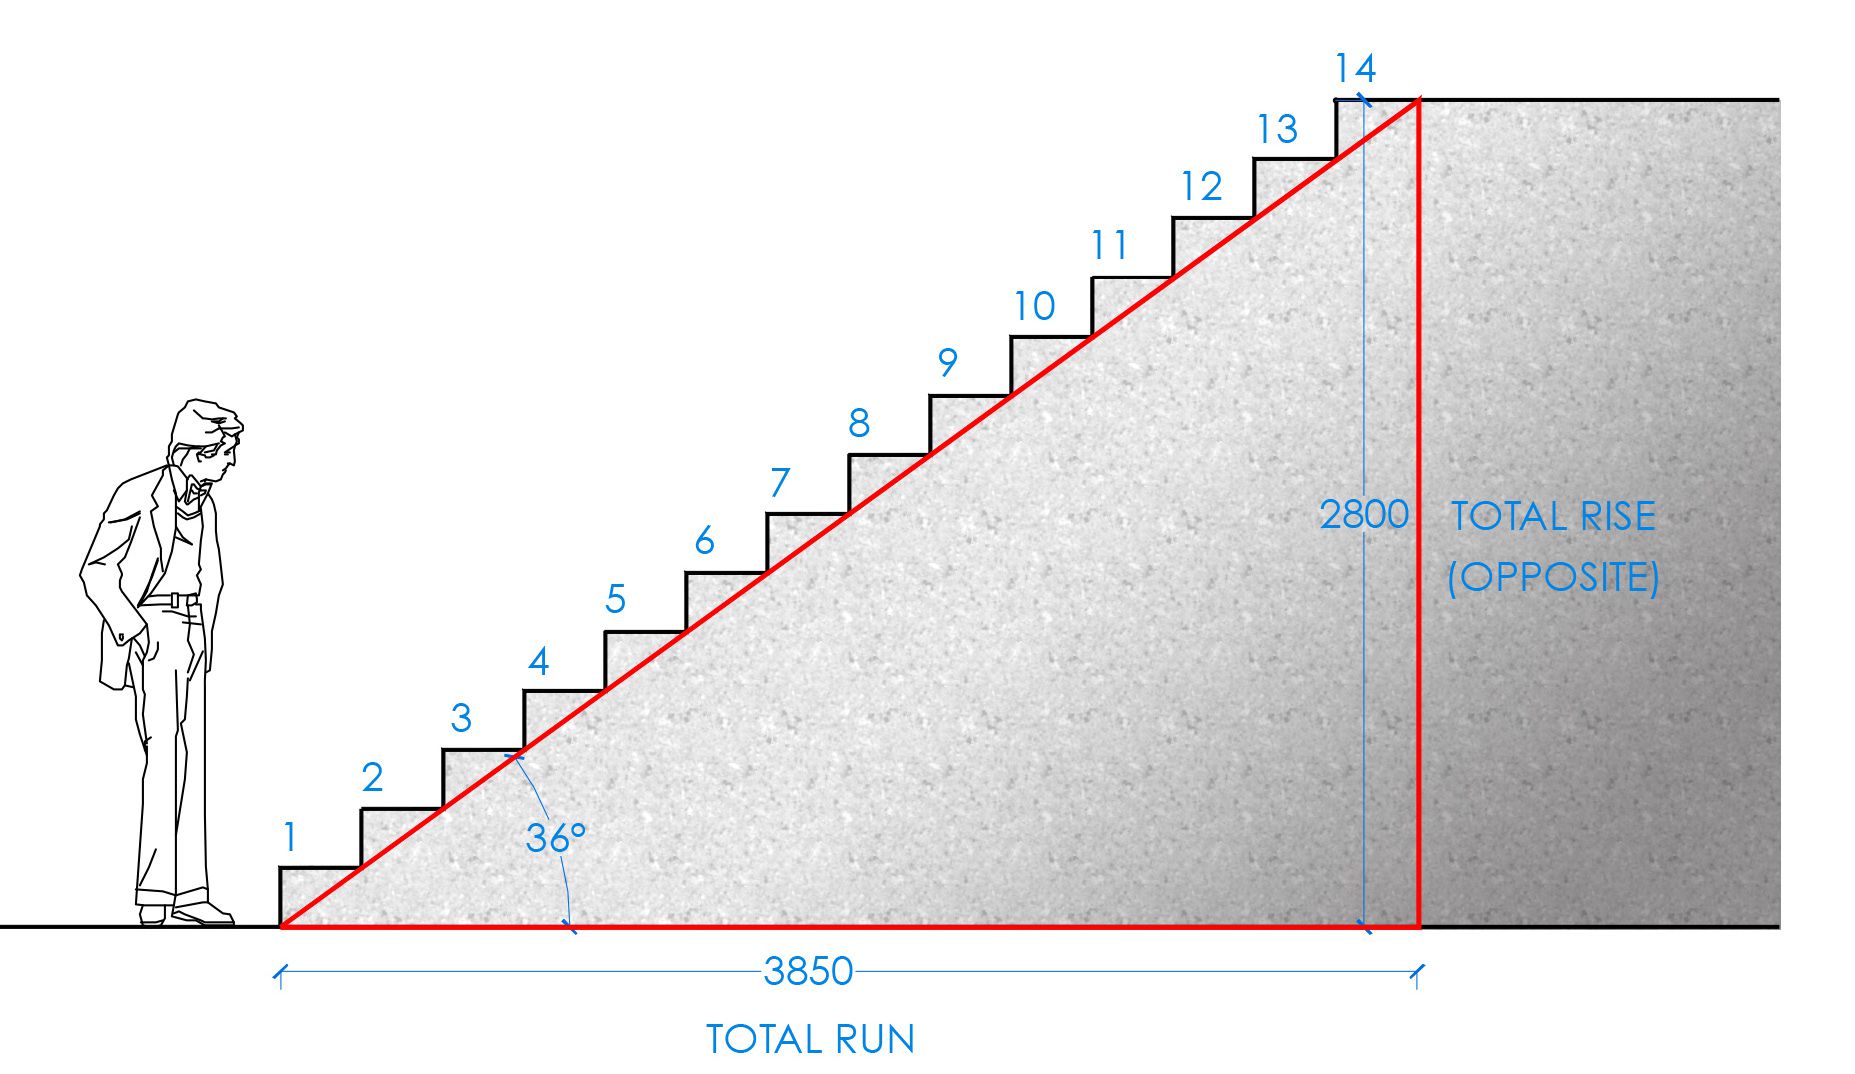 How to build stairs calculator - The Tech Edvocate